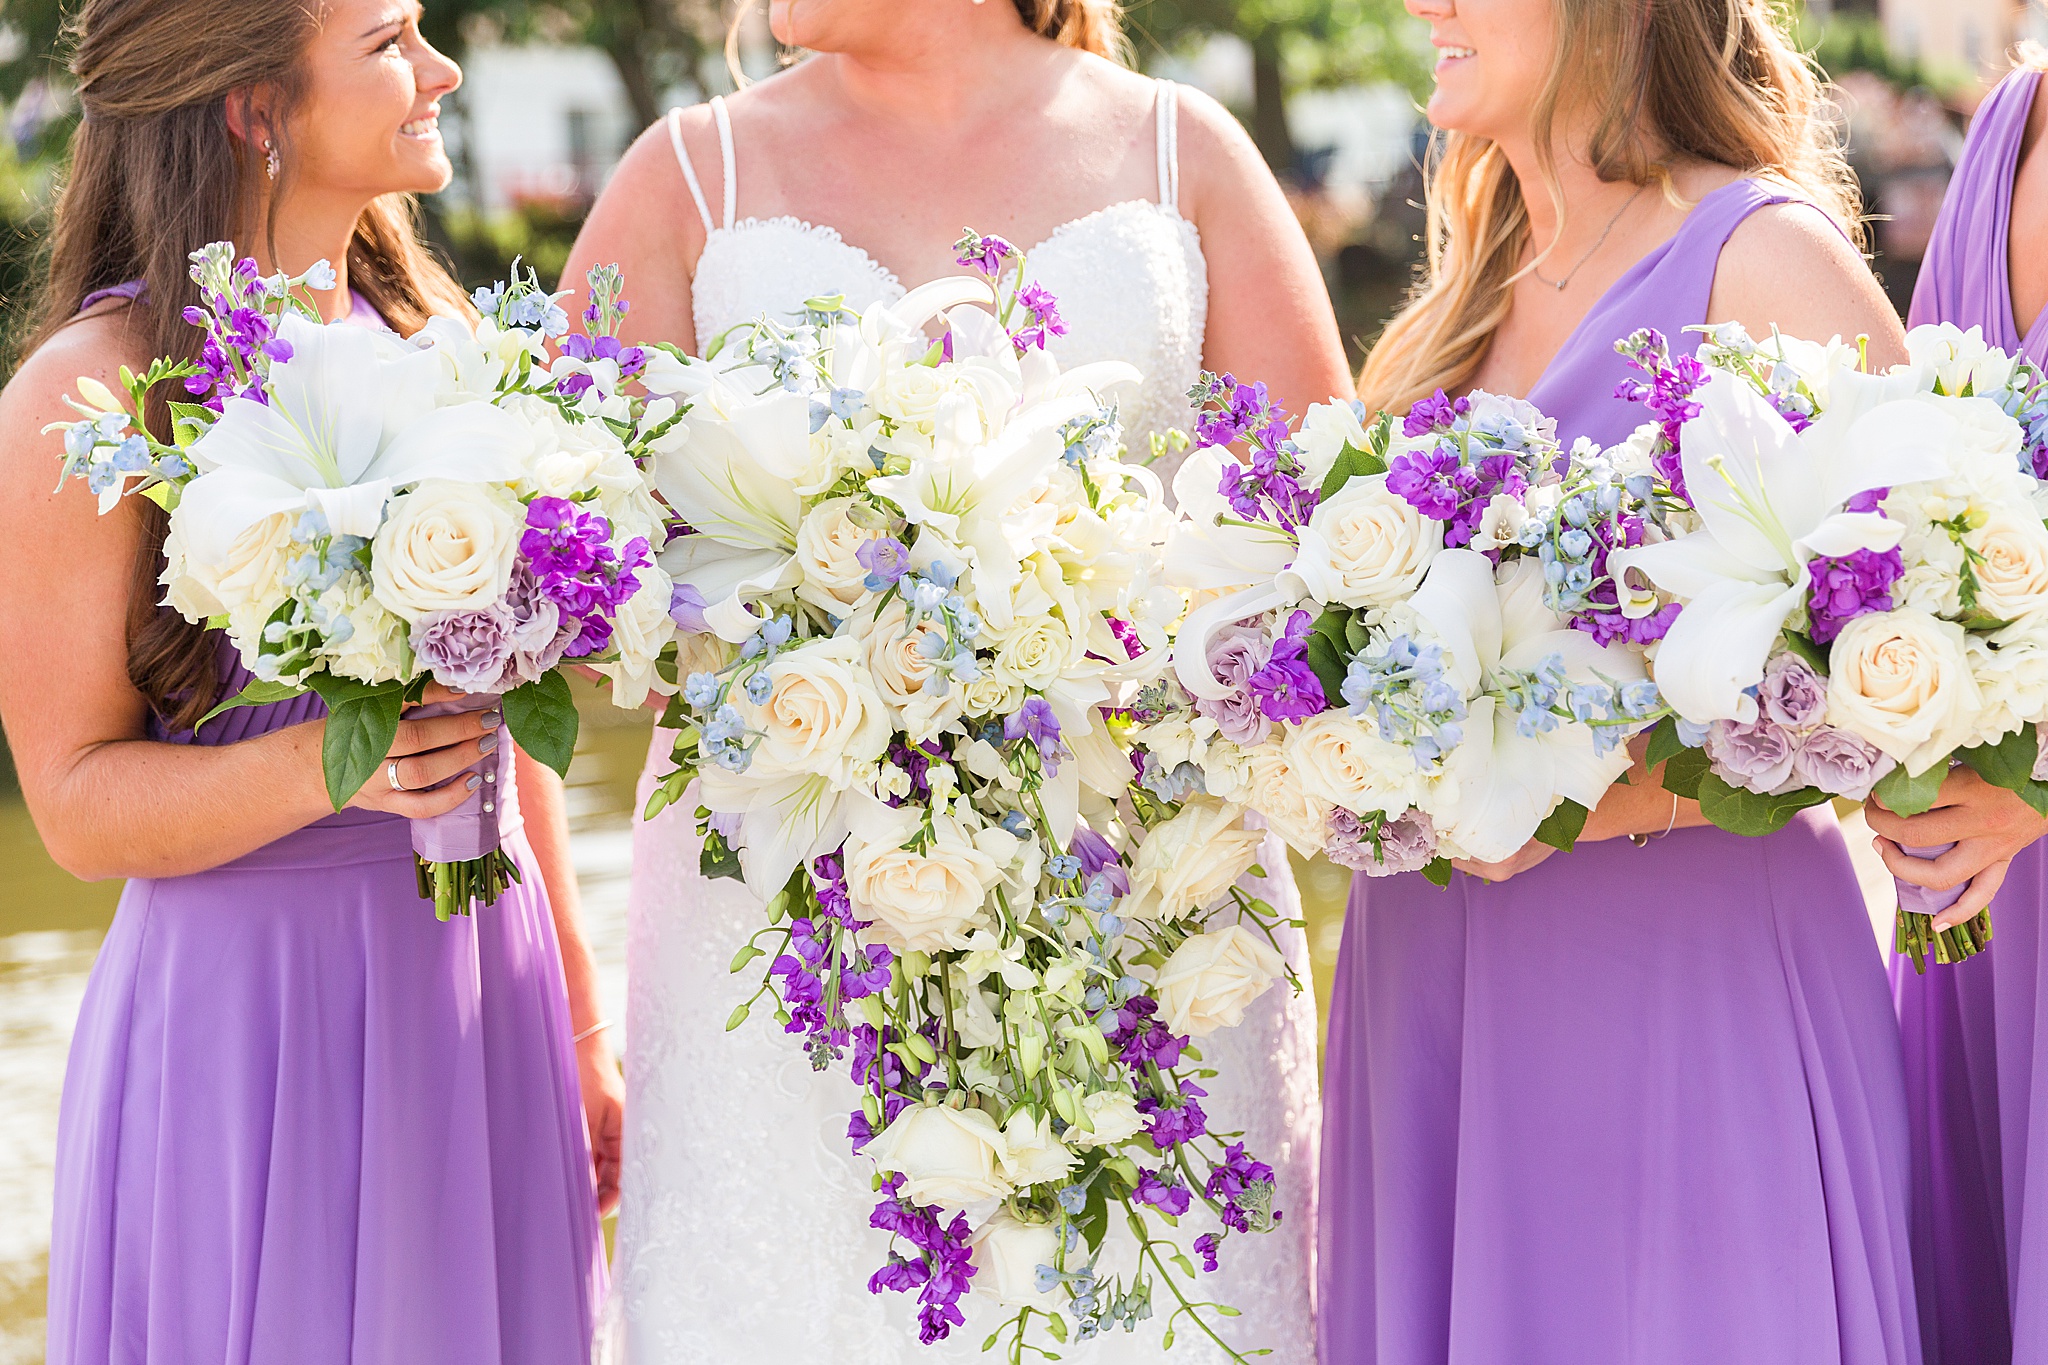 wedding bouquets by Ann's Garden photographed by Alexandra Mandato Photography